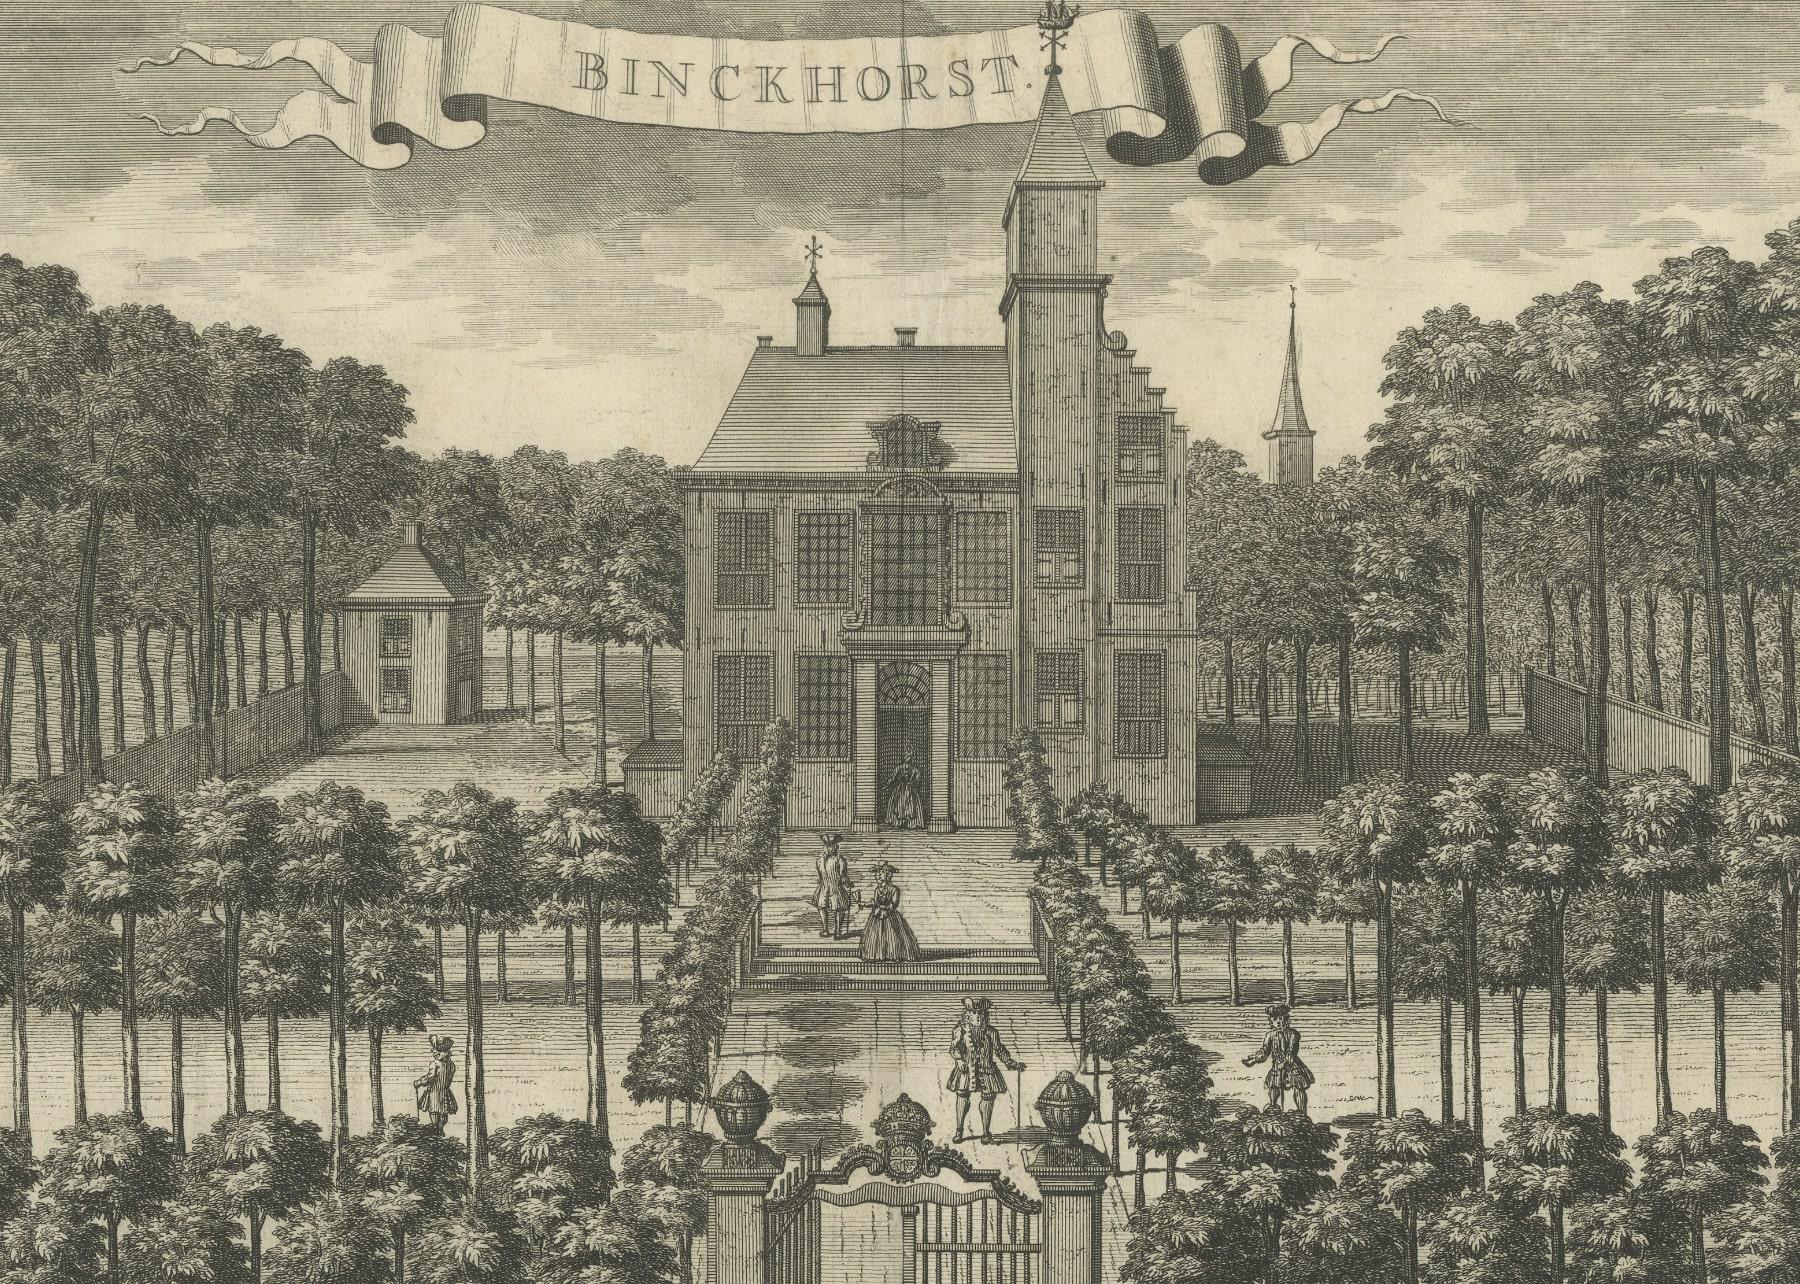 Antique print titled 'Binckhorst'. View on the Binckhorst in The Hague. This print was used in: Jacob de Riemer’s: “Beschryving van ‘s-Graven-Hage…” Delft and Den Haag, 1730-1739. Titled above, on a ribbon: ‘Binckhorst.’ Signed at bottom: ‘G.v.